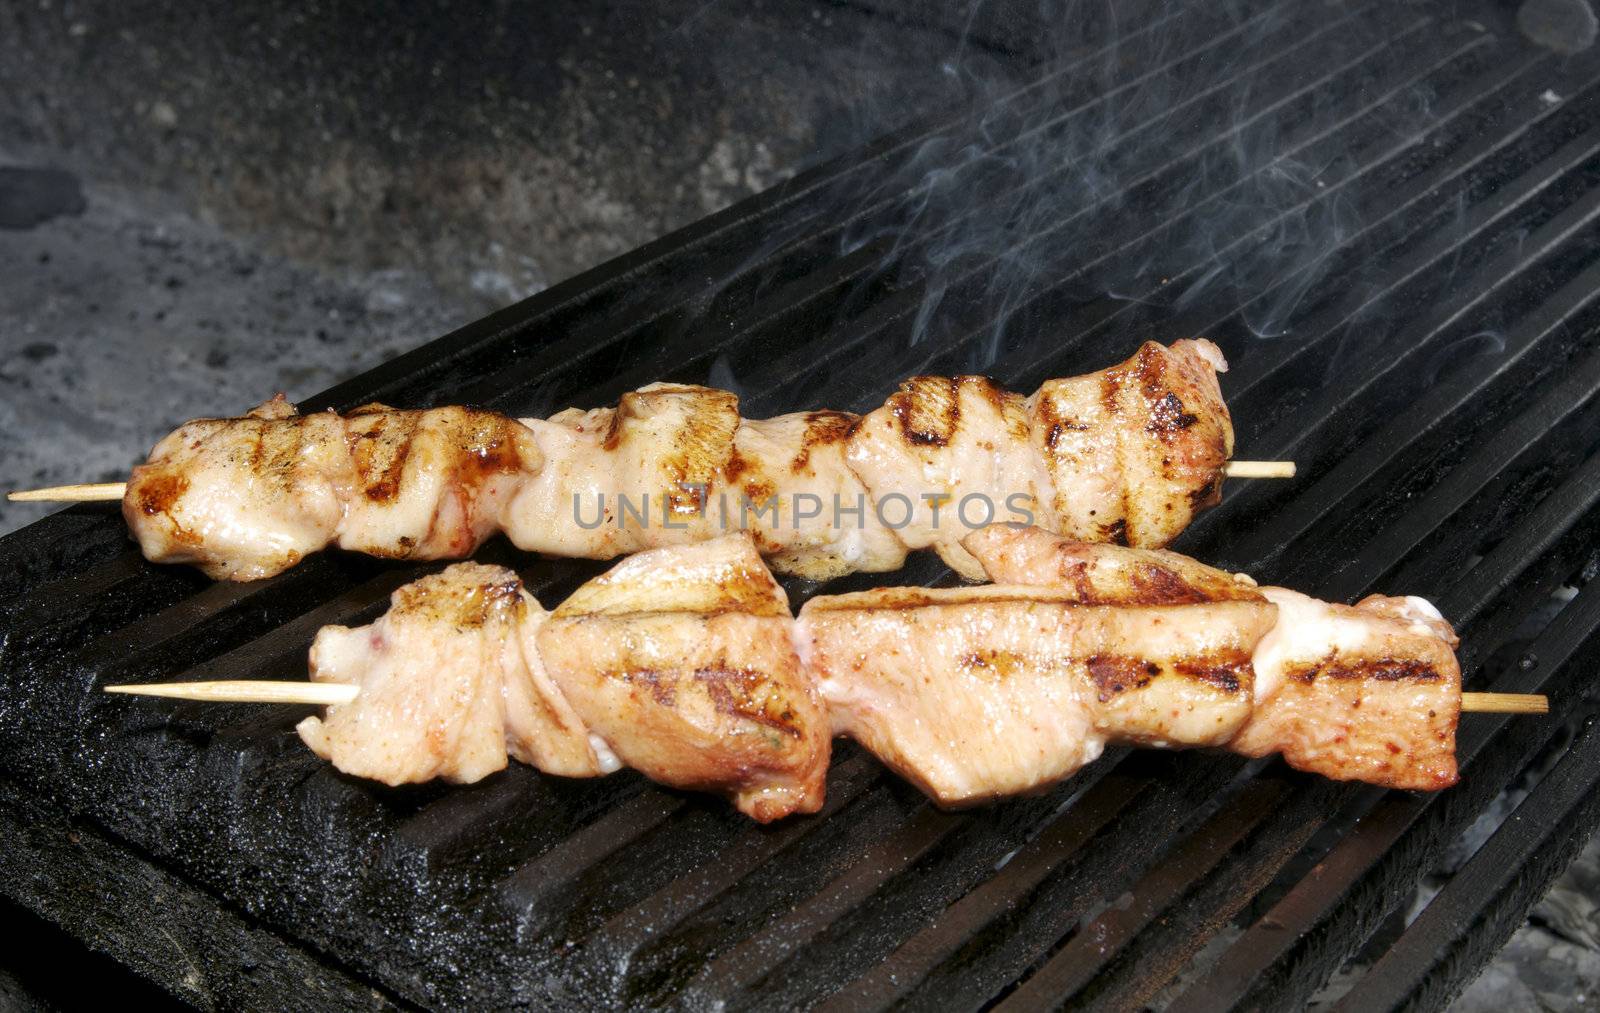 Chicken kebabs on the grill by Lester120